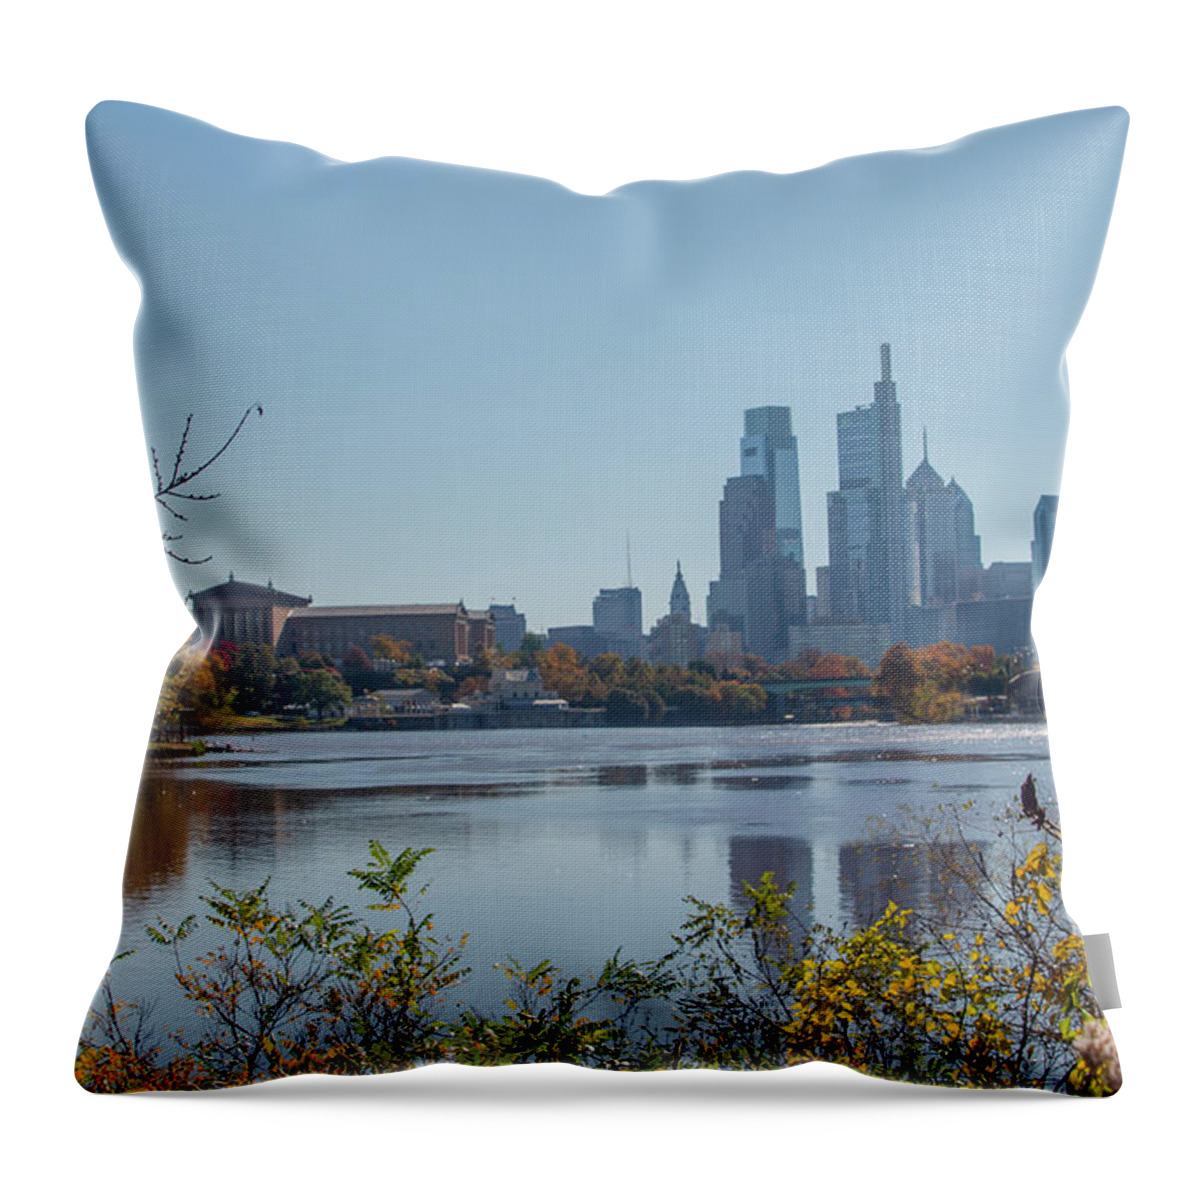 Schuylkill Throw Pillow featuring the photograph Schuylkill River Skyline View - Philadelphia in Autumn by Bill Cannon